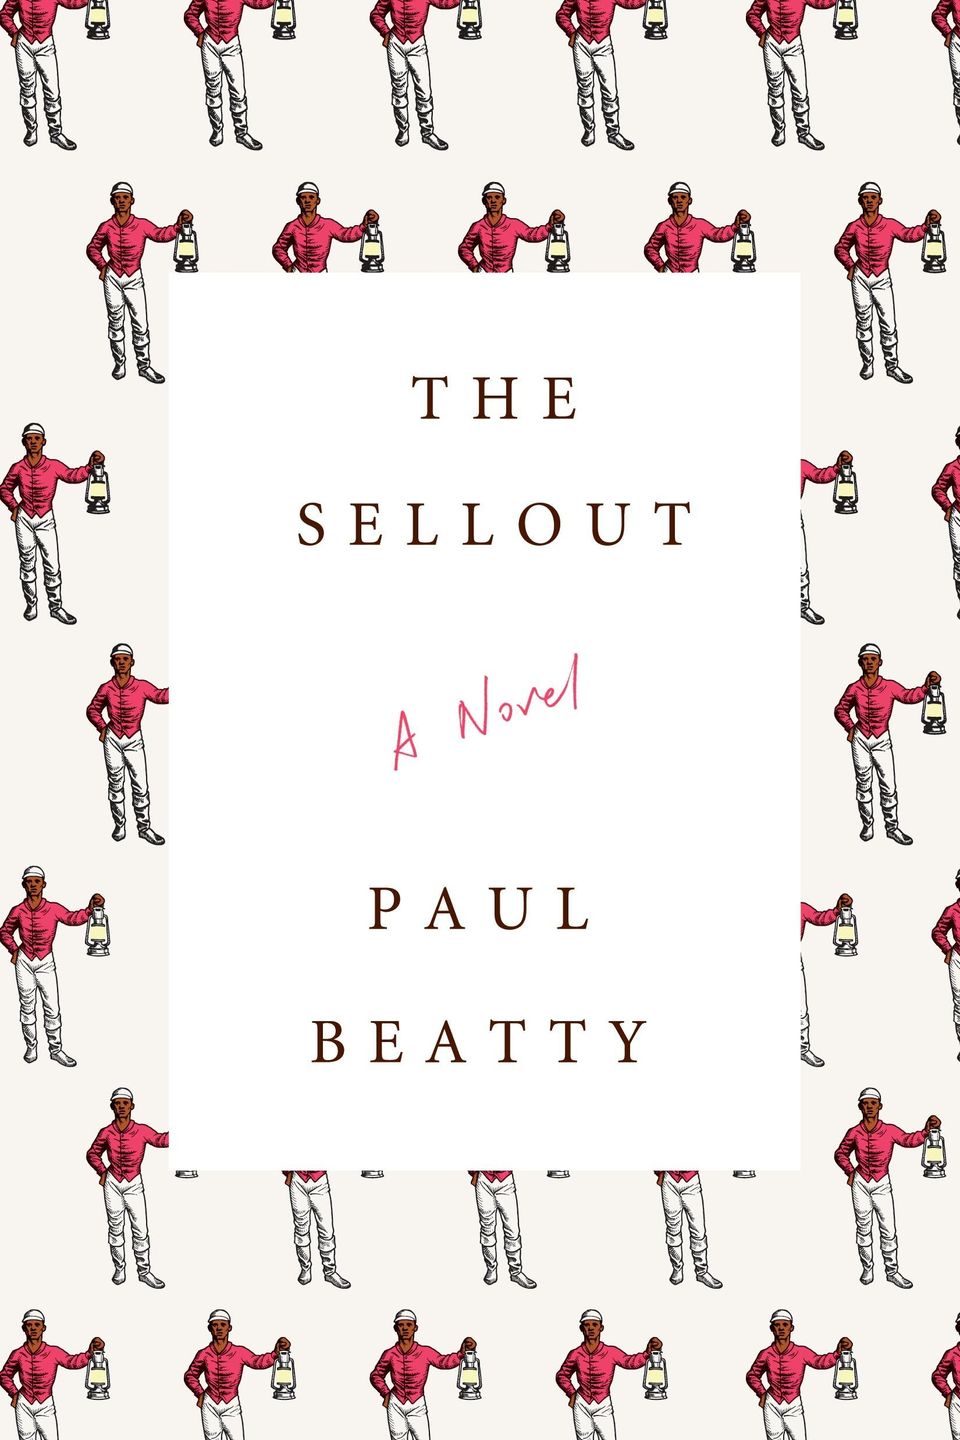 'The Sellout' by Paul Beatty